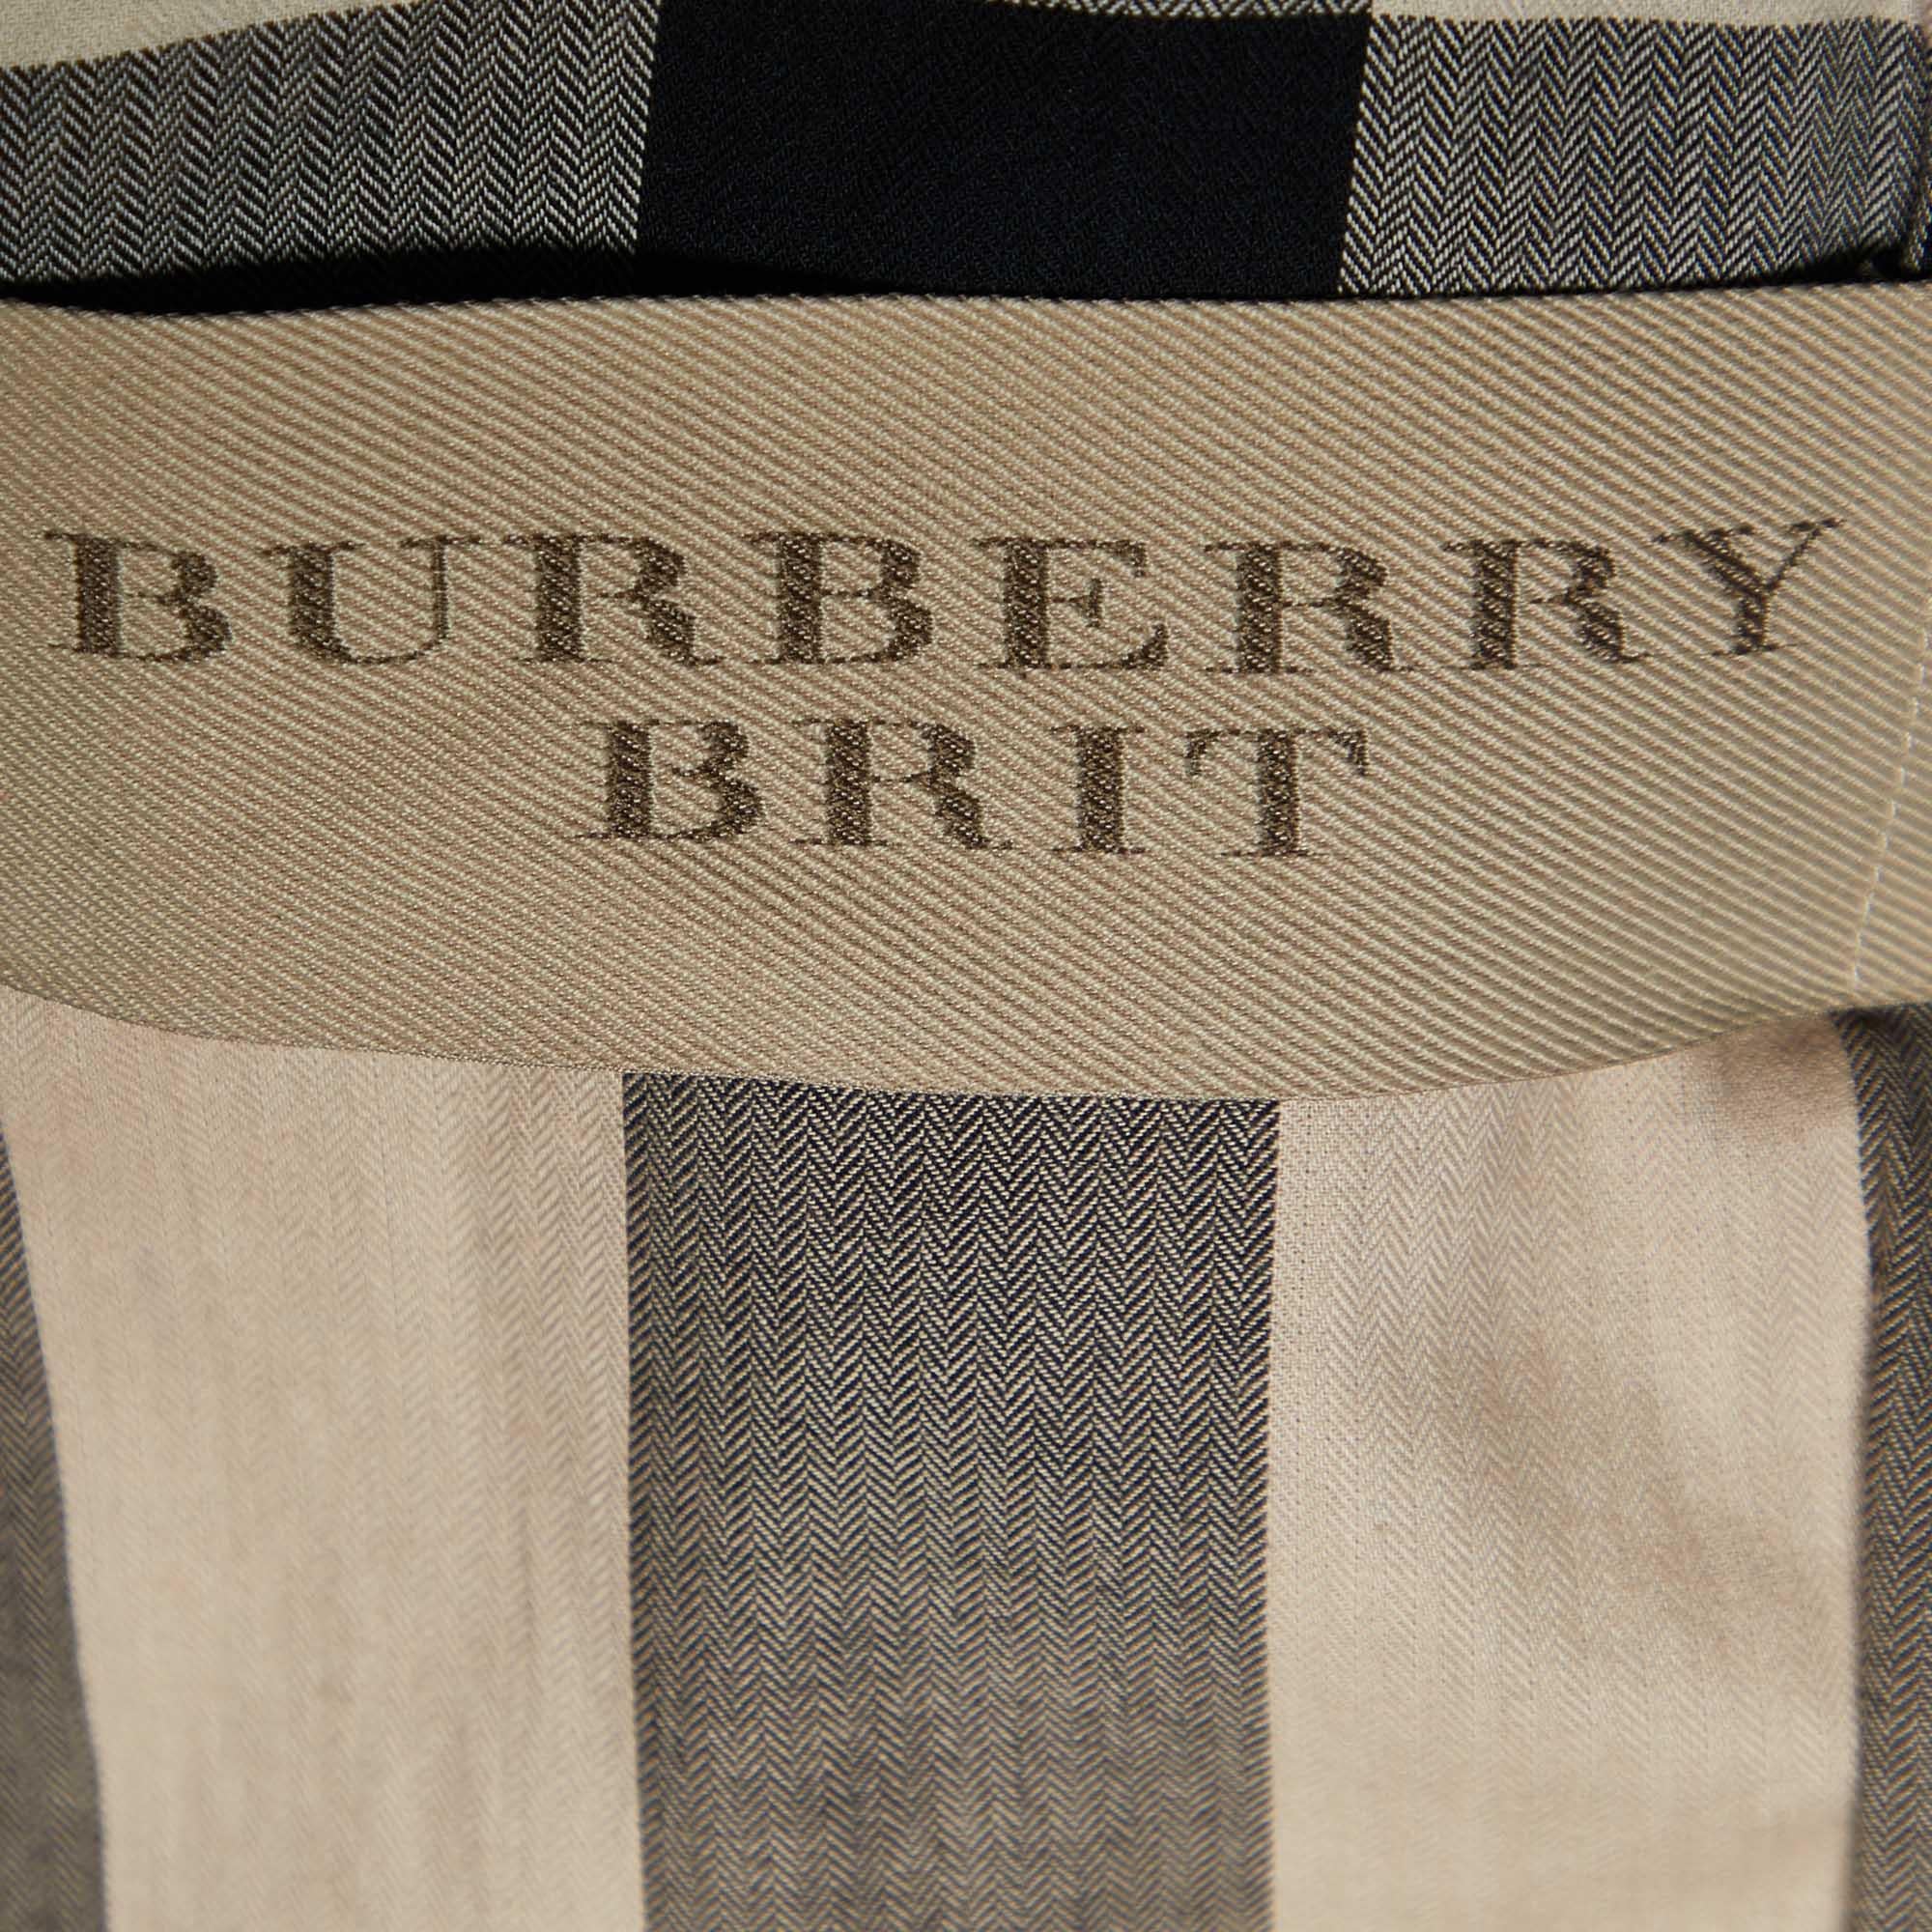 Burberry Brit Black Cotton Belted Trench Coat S 1